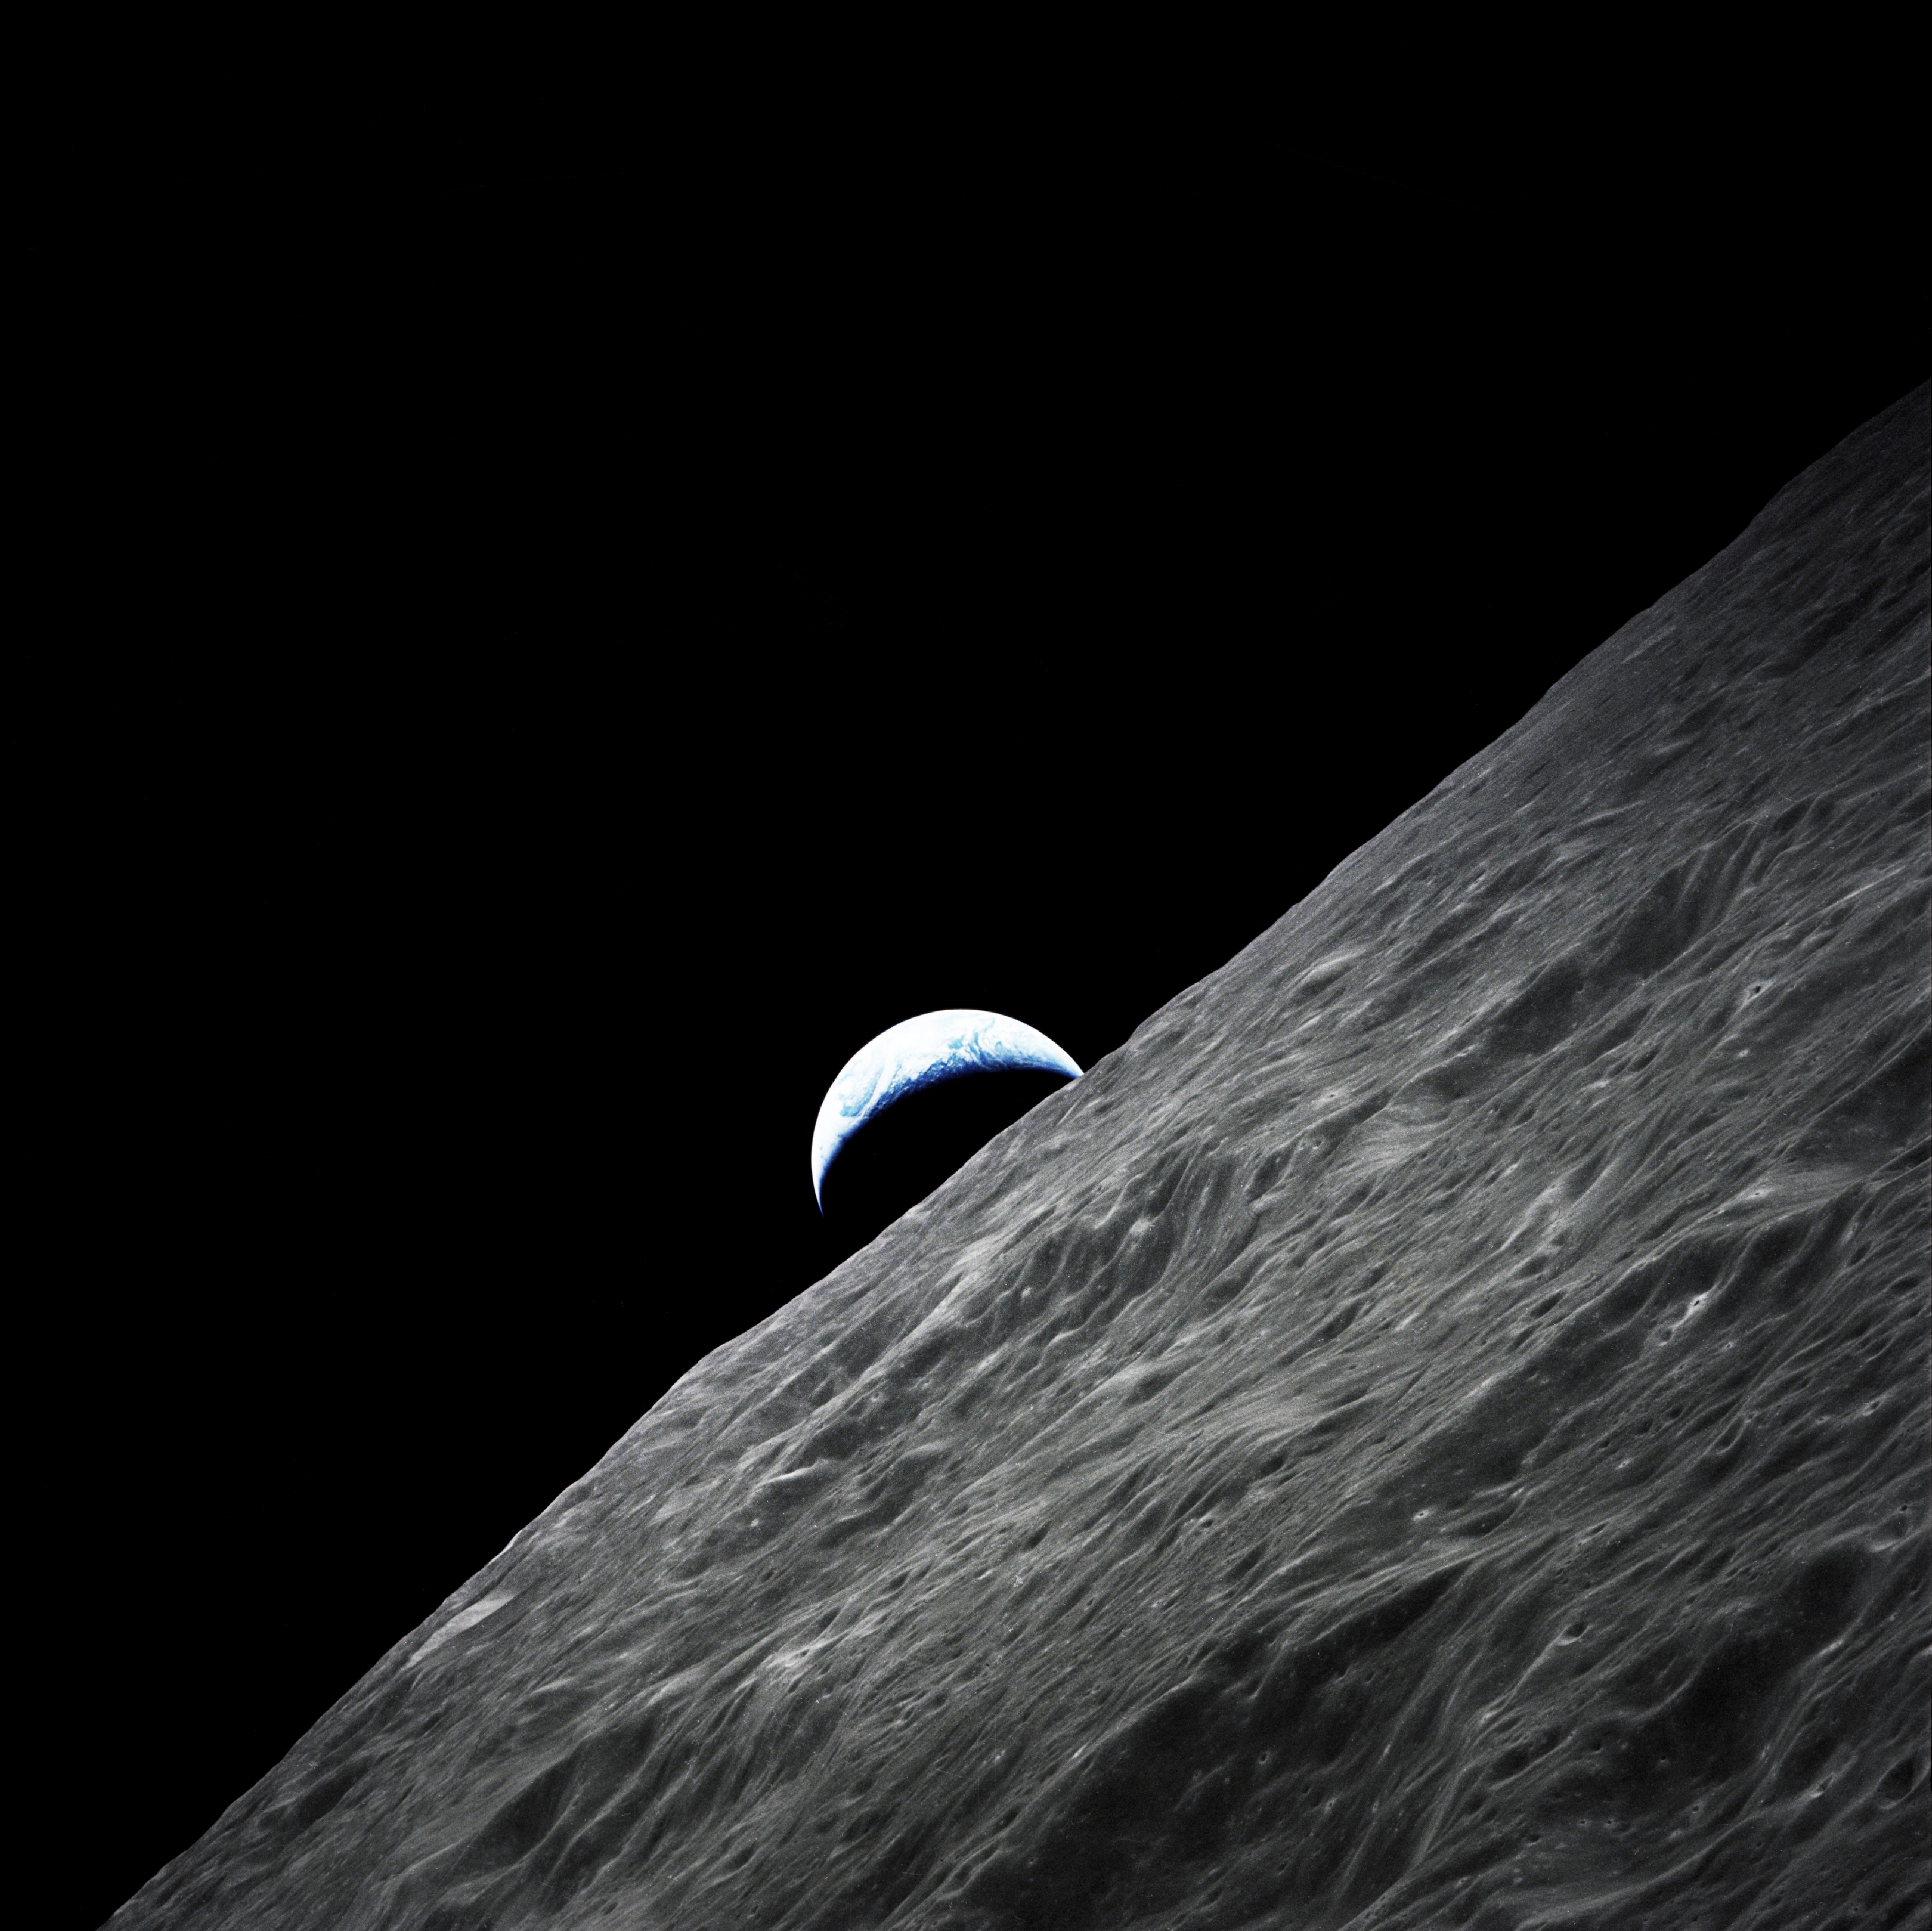 Picture of Earth in a crescent shape taken from Moon